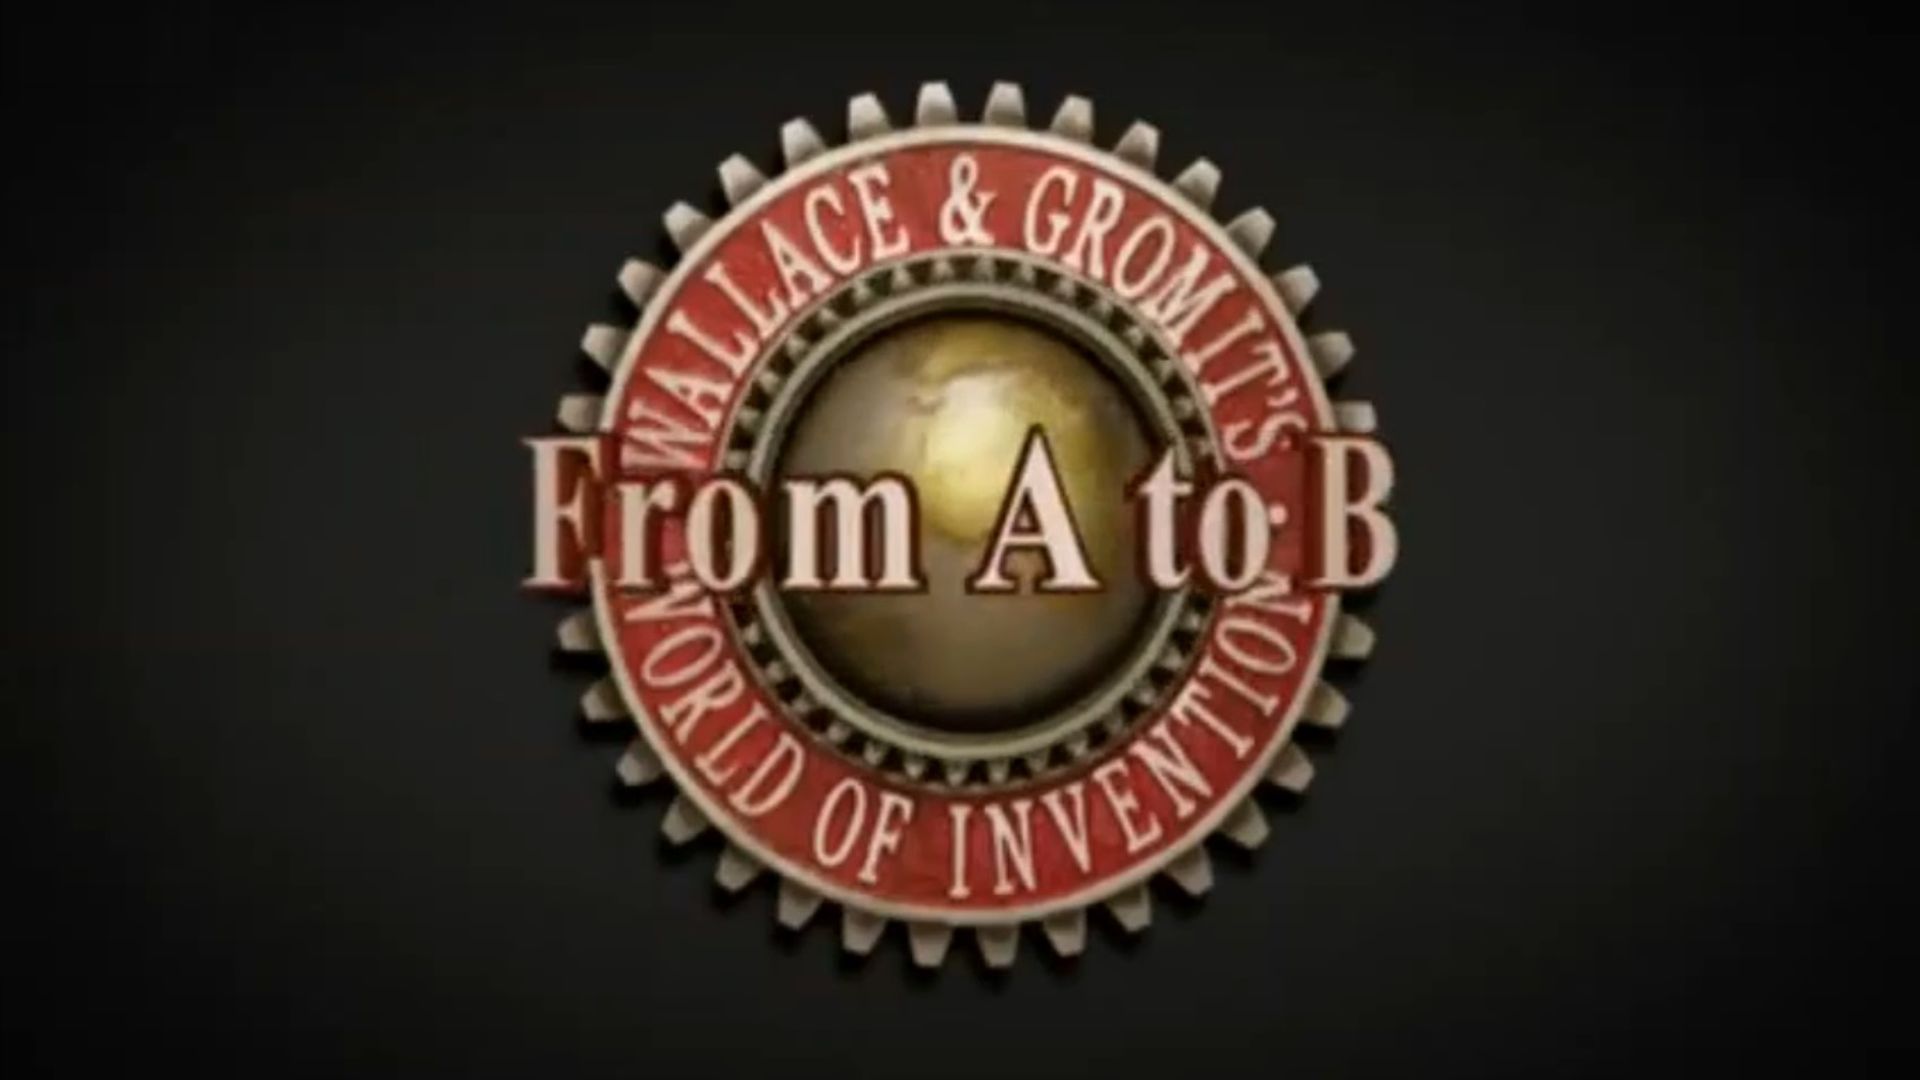 Wallace and Gromit's World of Invention background